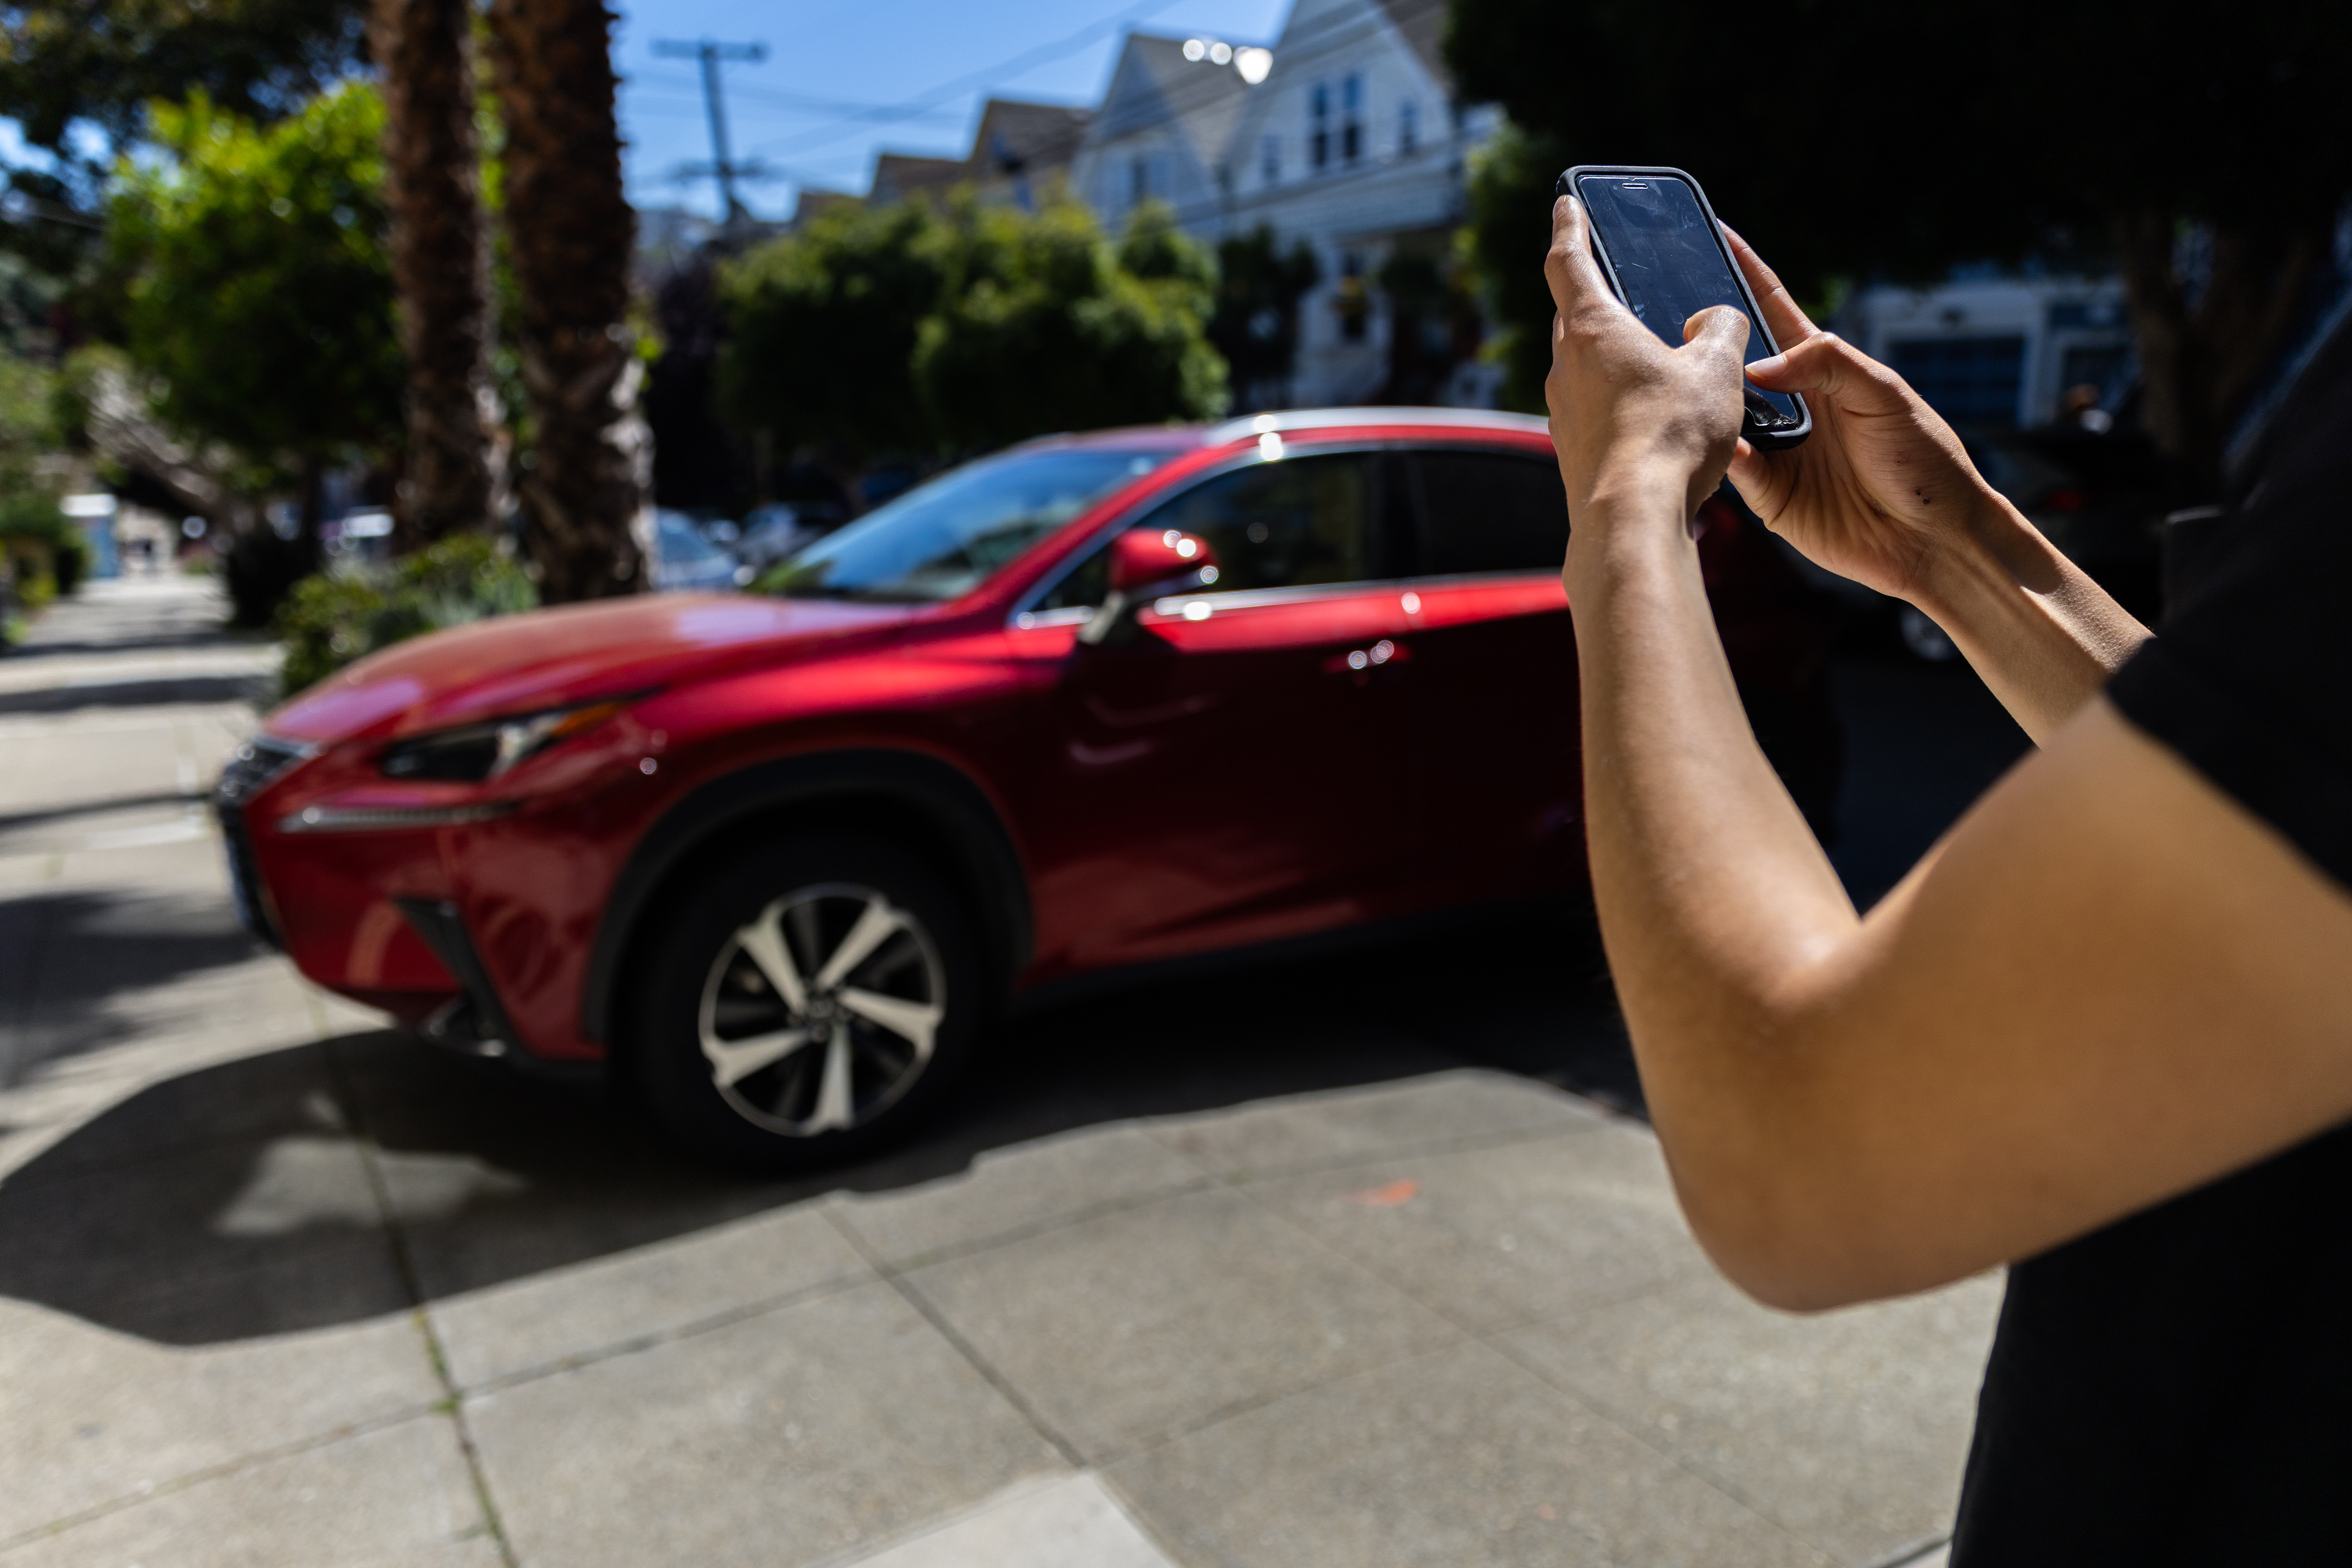 A person is holding a smartphone, focusing on a red car parked on a sunny street lined with trees and houses.